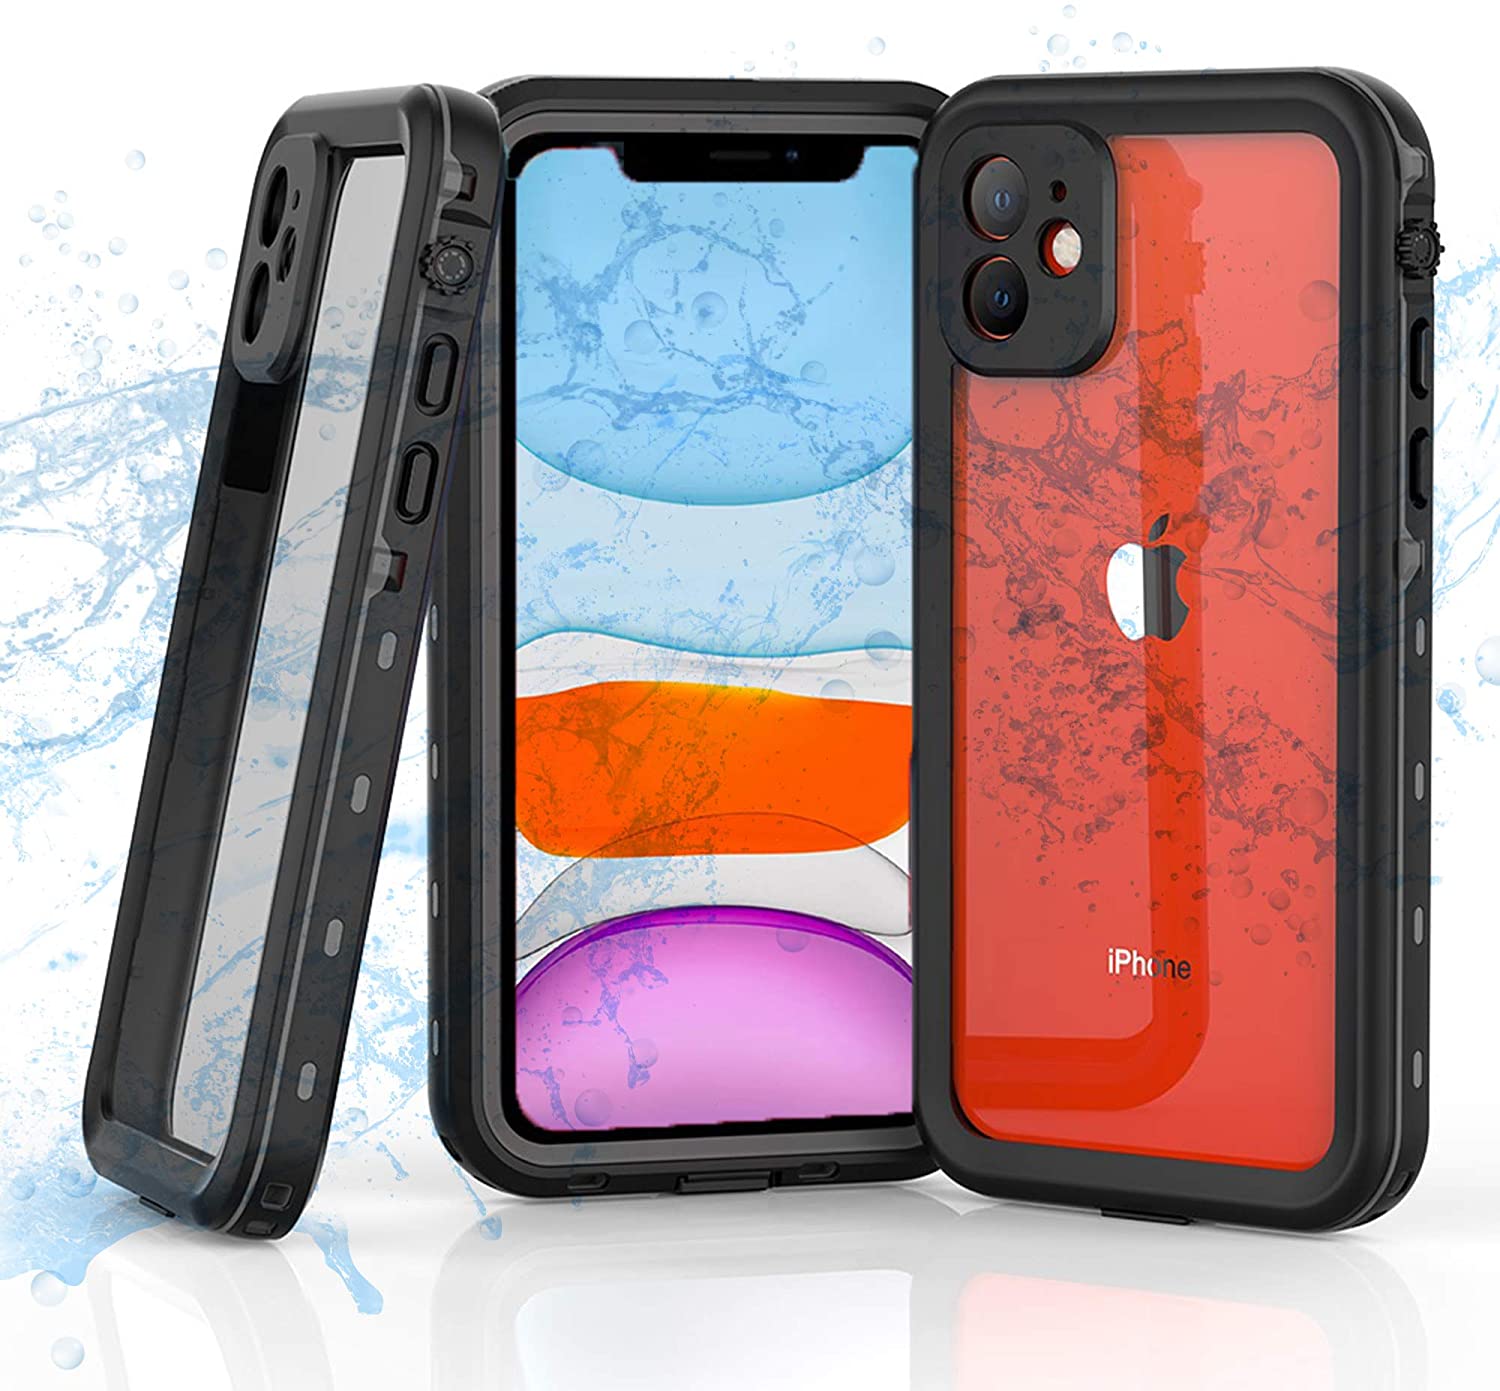 ShellBox Case iPhone 11 Pro Max Waterproof Case. - e4cents